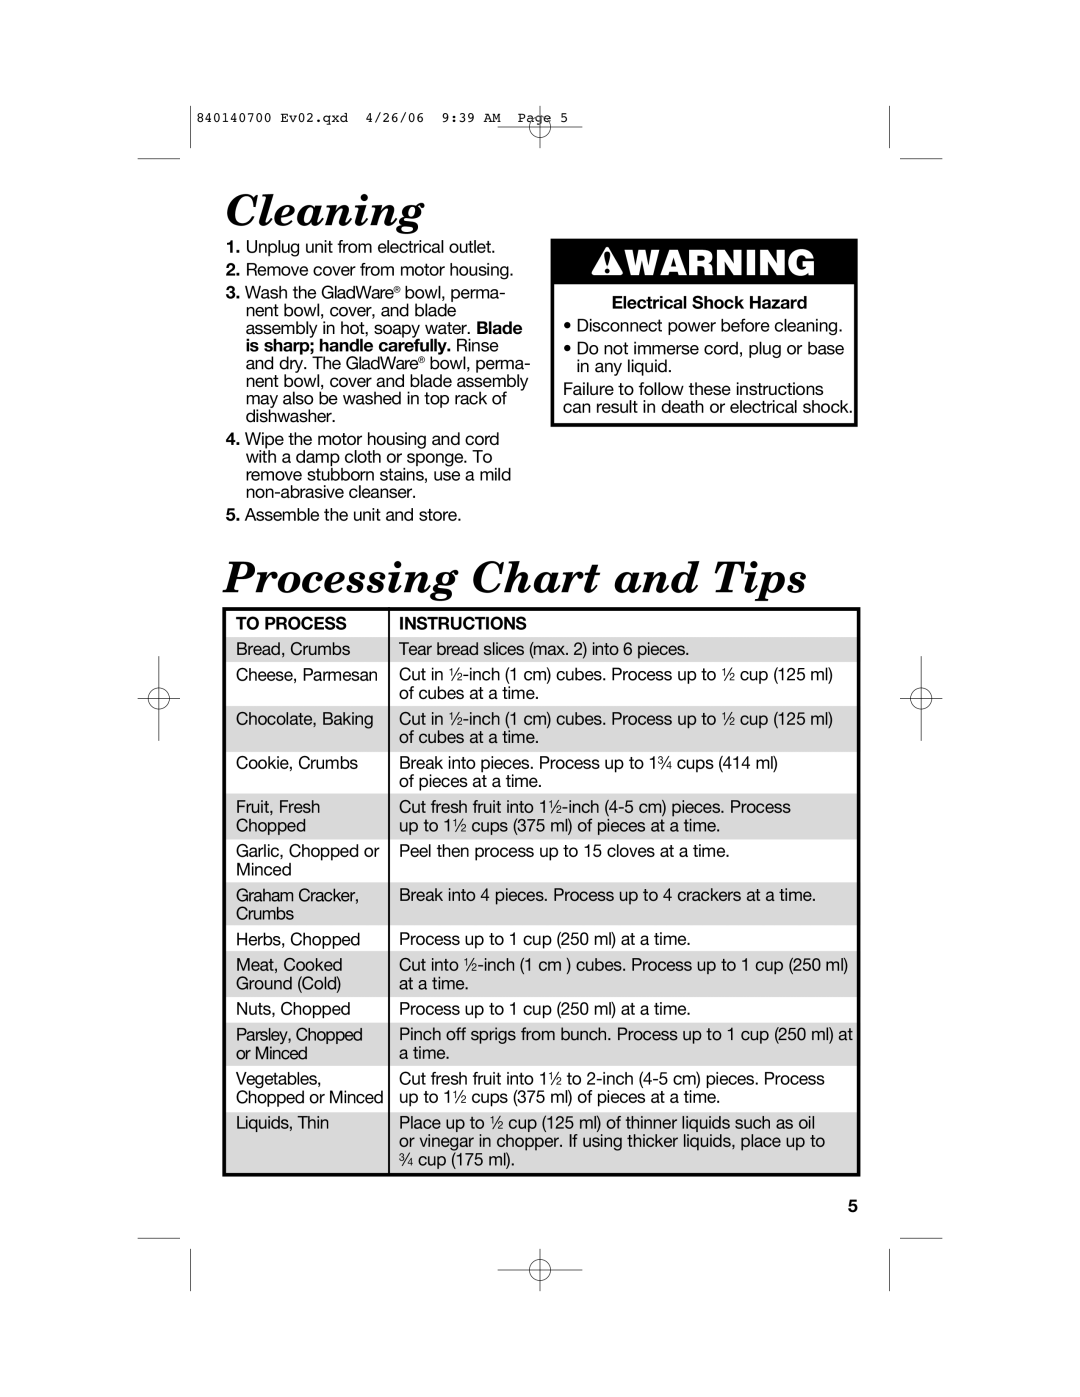 Hamilton Beach 72850 Cleaning, Processing Chart and Tips, Electrical Shock Hazard, To Process, Instructions, wWARNING 